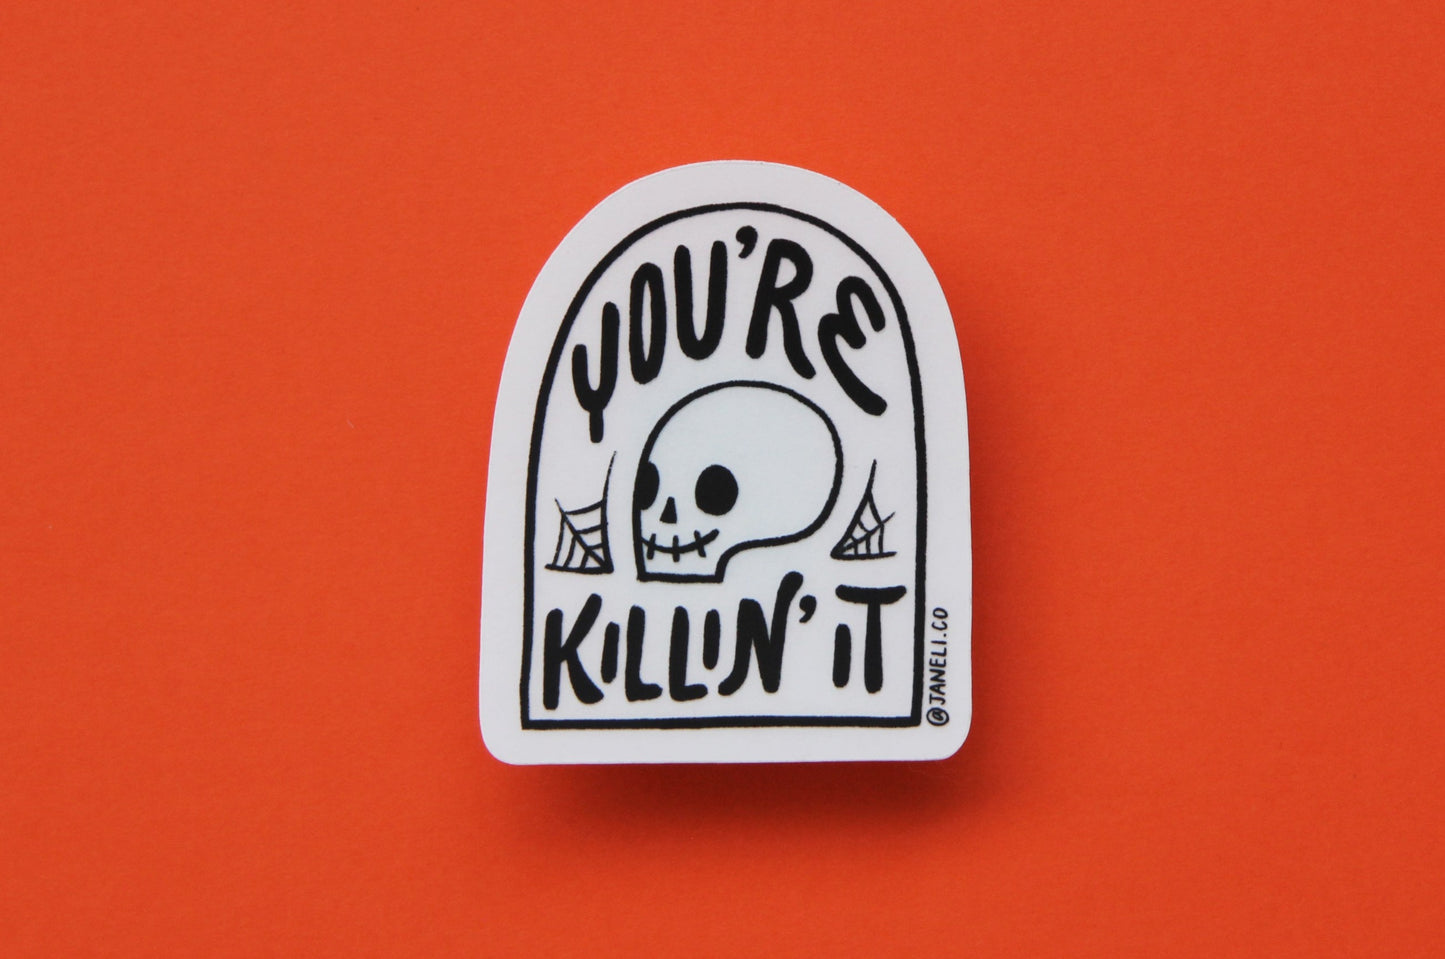 A JaneLi.Co sticker that says "You're Killin' It" in the shape of a tombstone with a skull in it over an orange background.